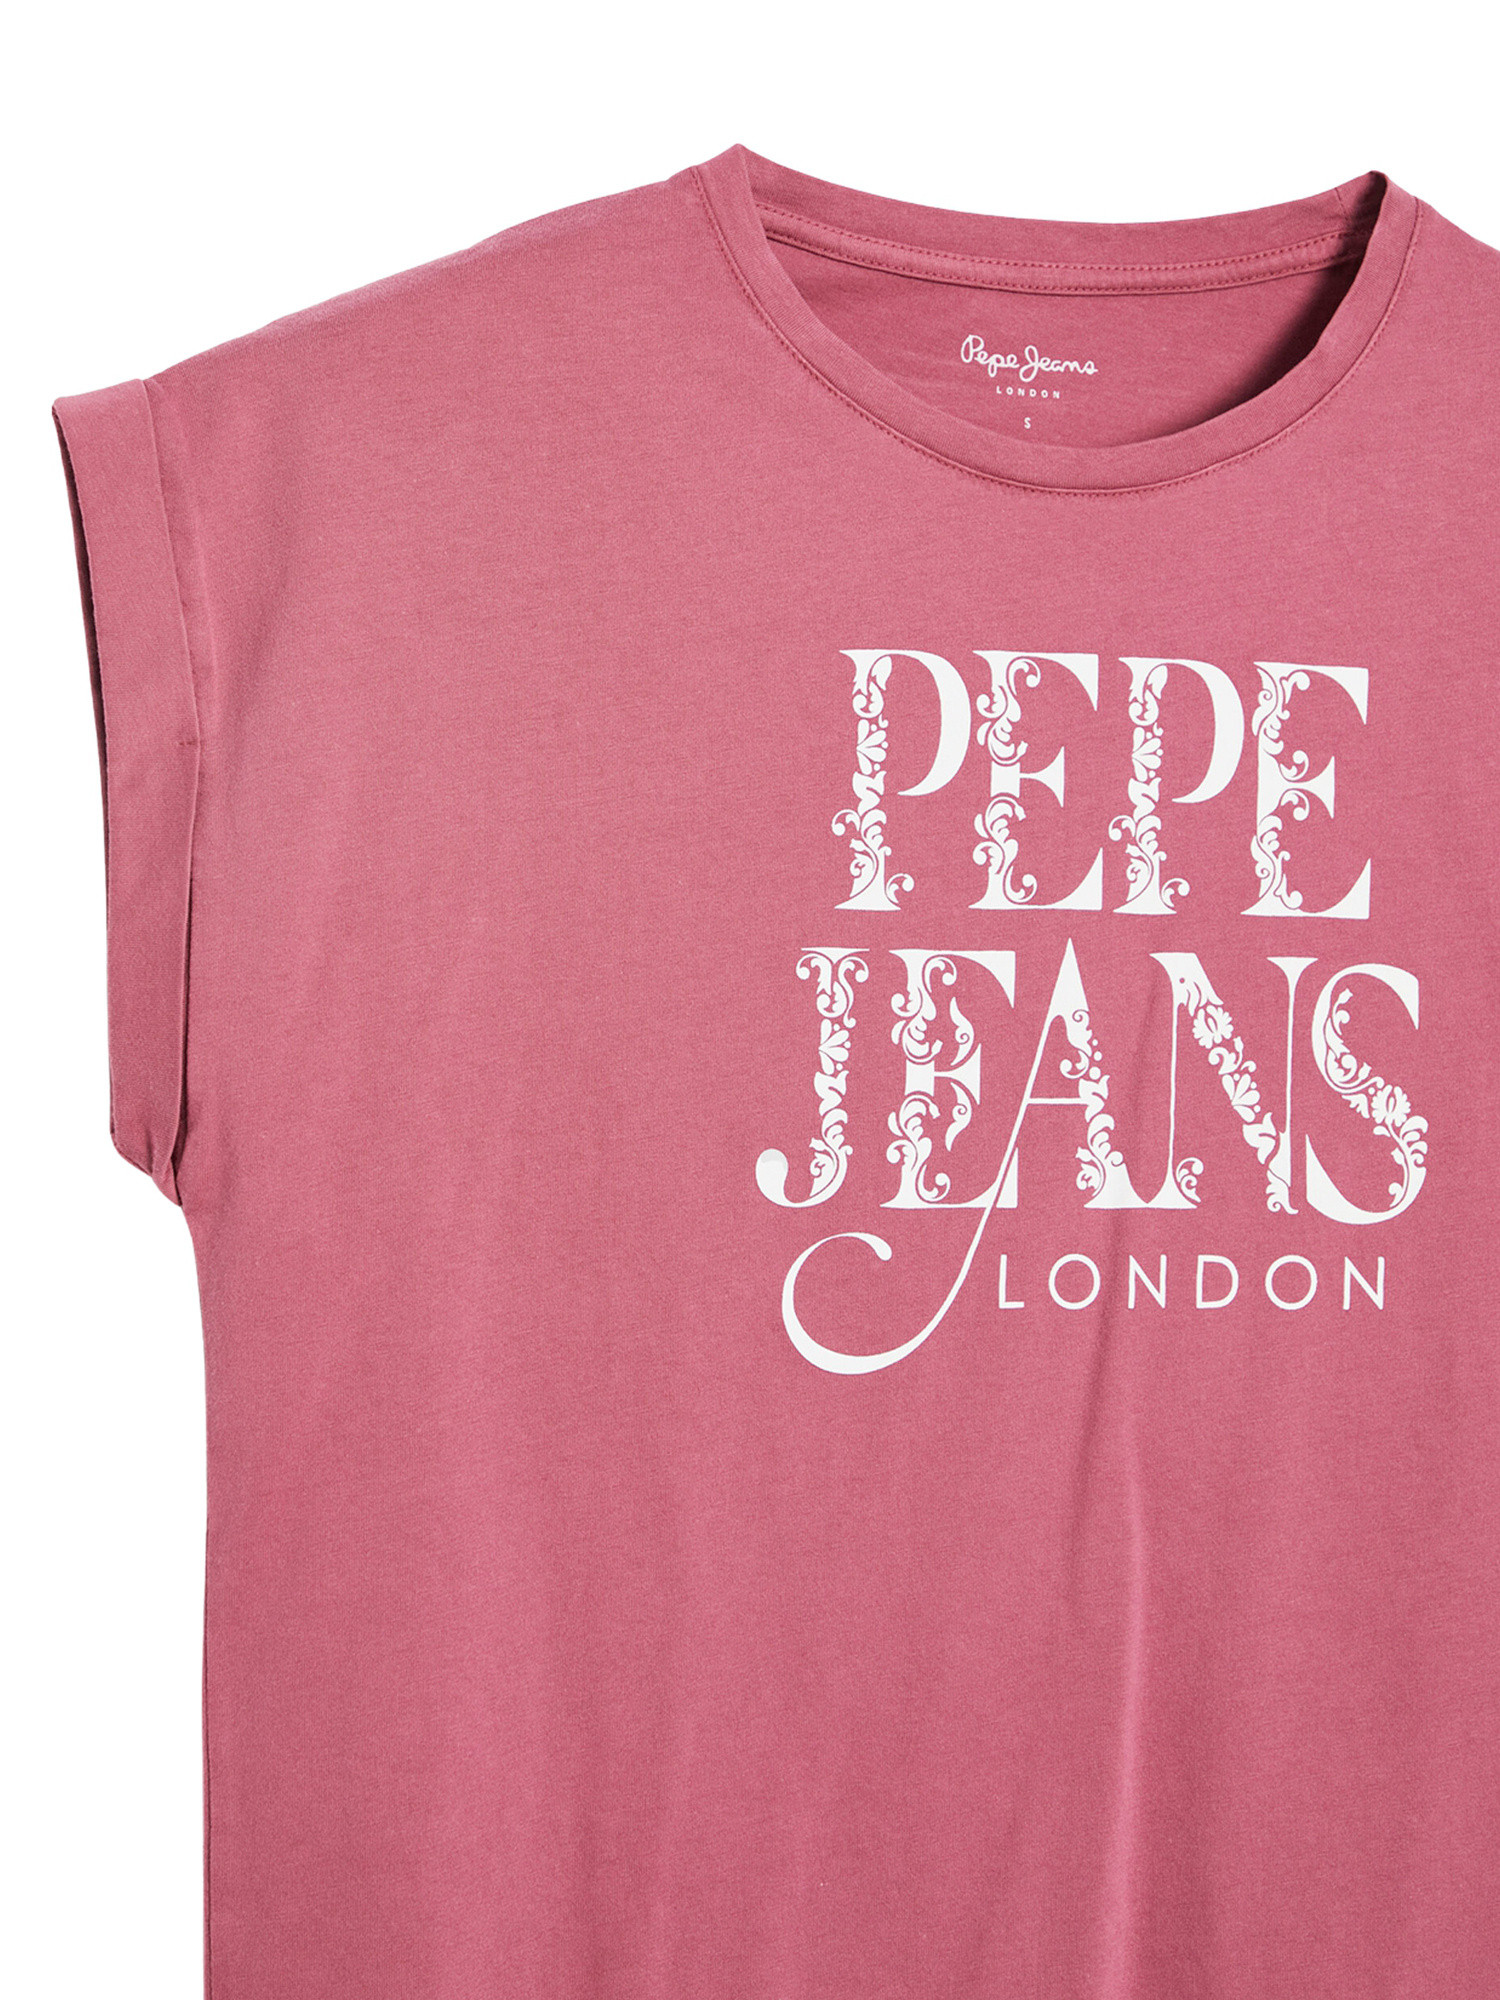 Pepe Jeans - T-shirt con logo in cotone, Rosa scuro, large image number 2